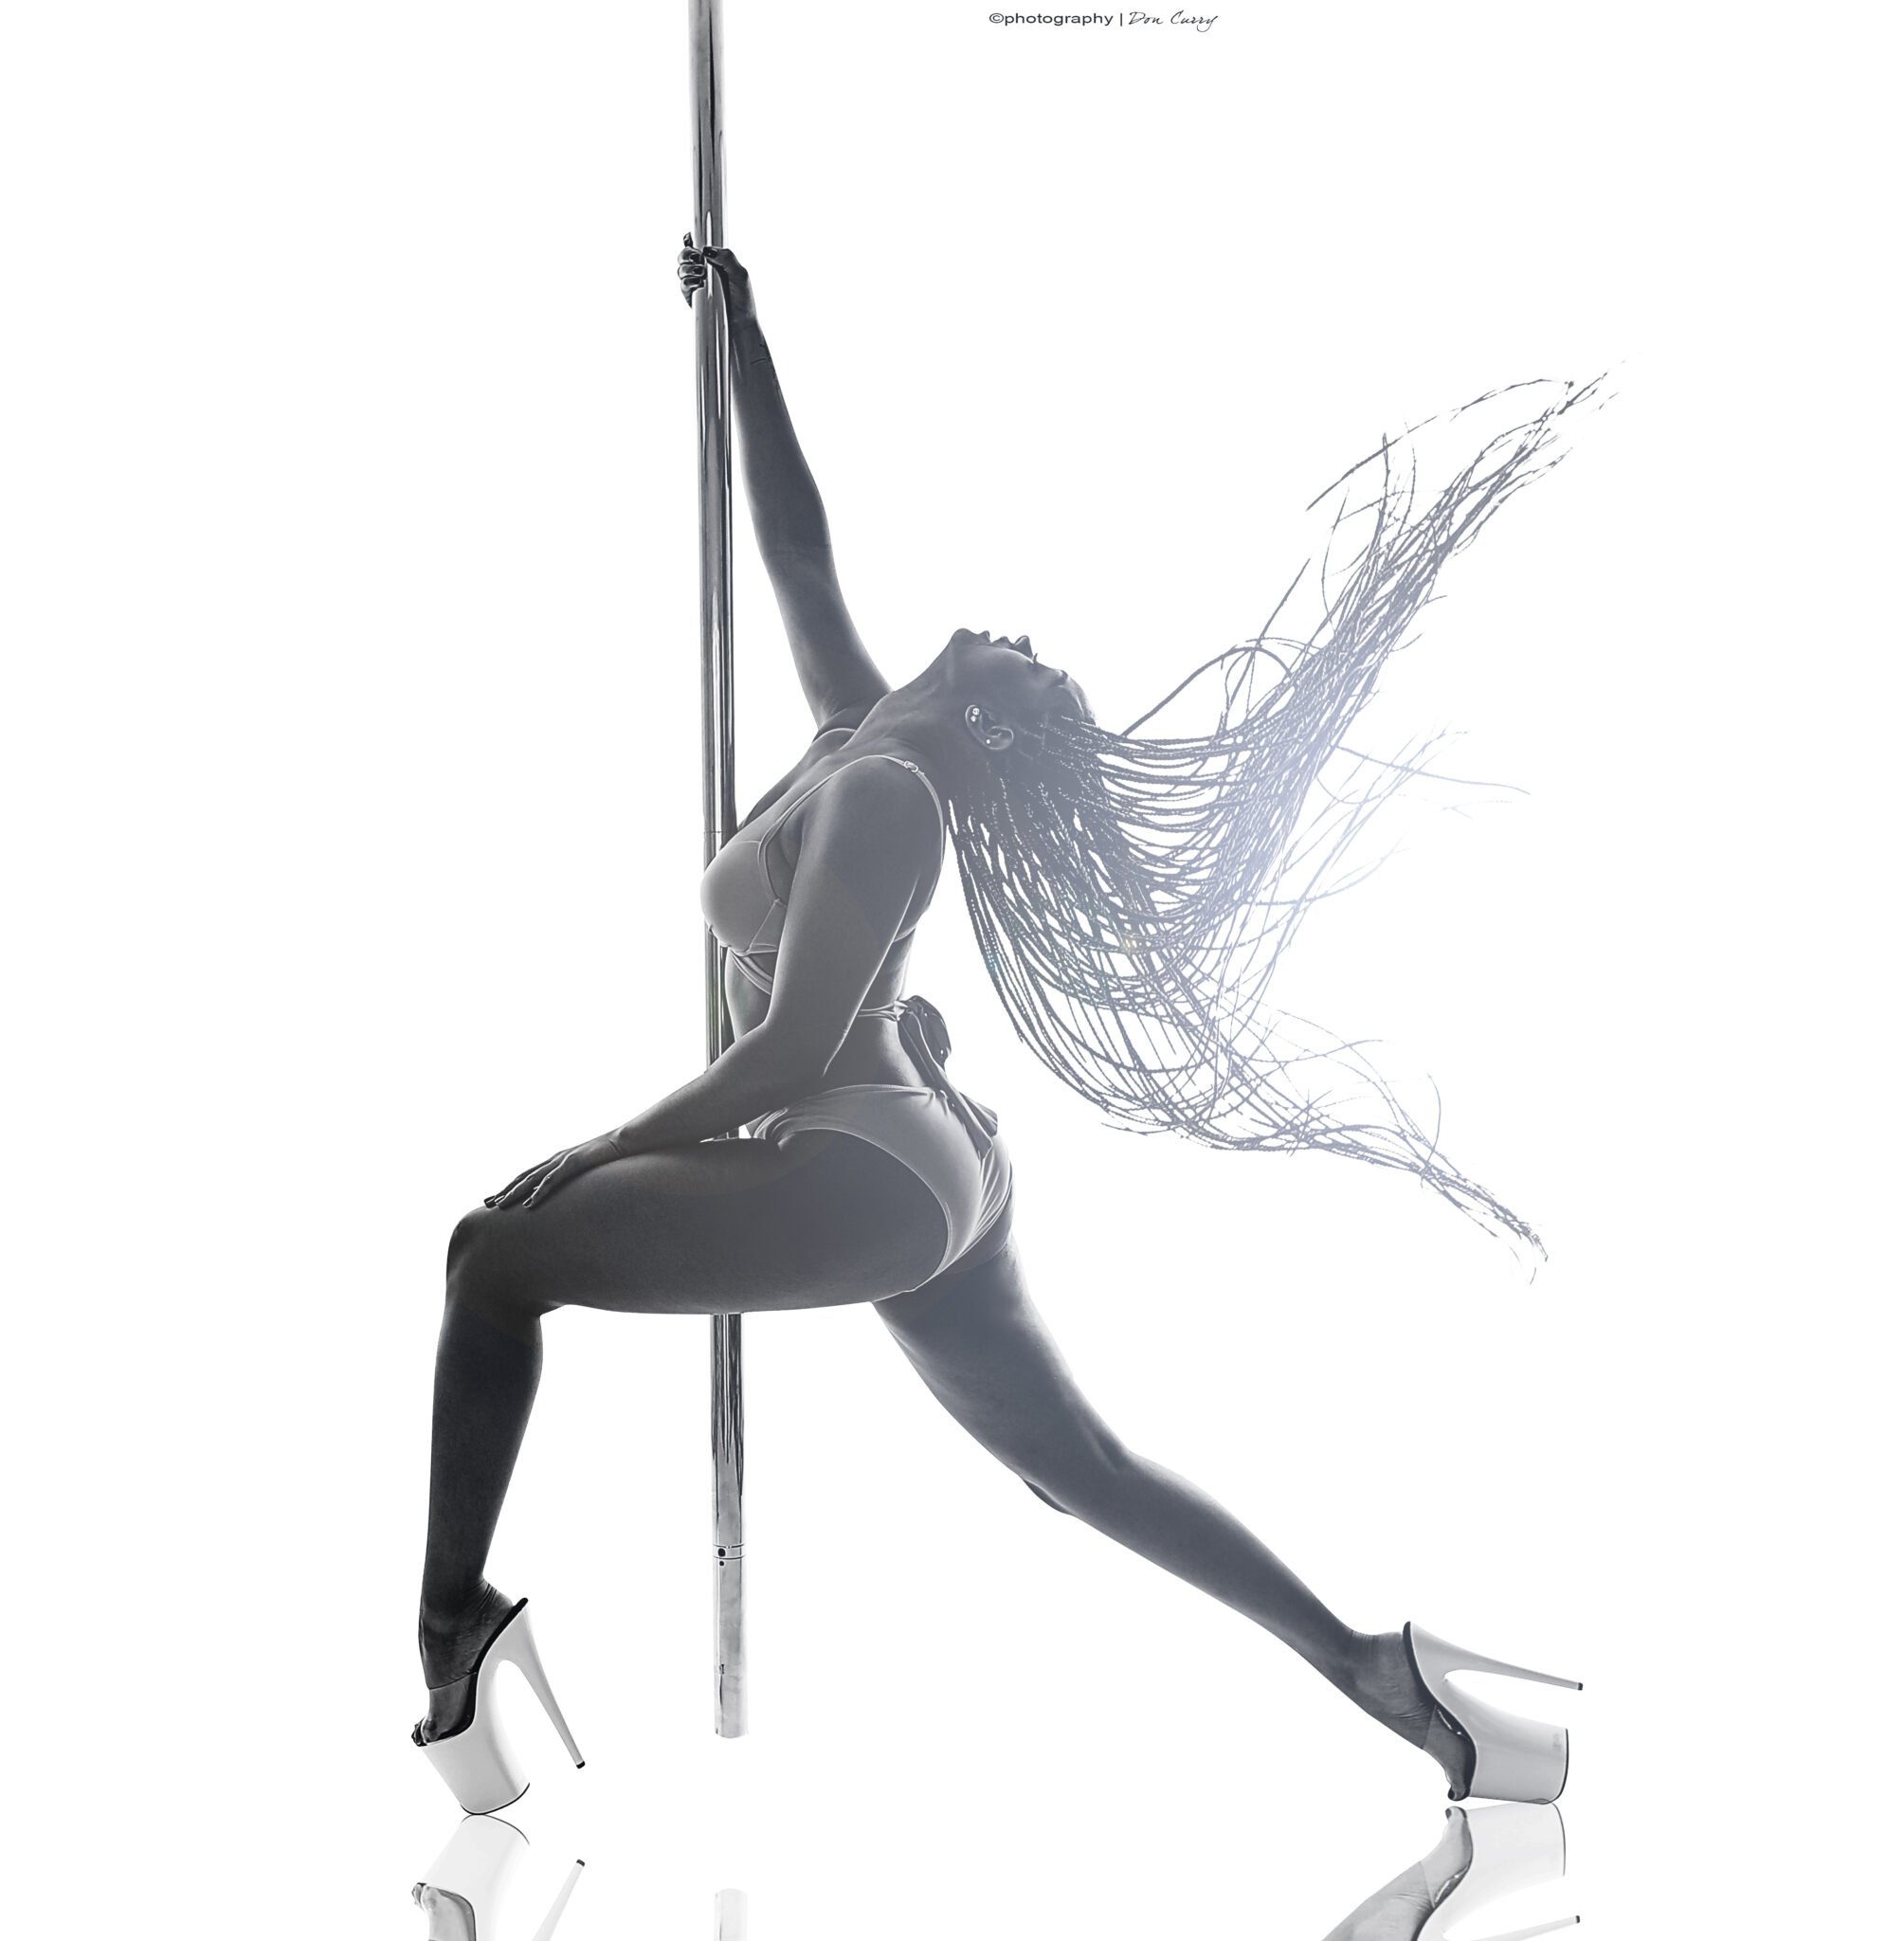 pole dance instructor legz flips hair while holding on to the pole